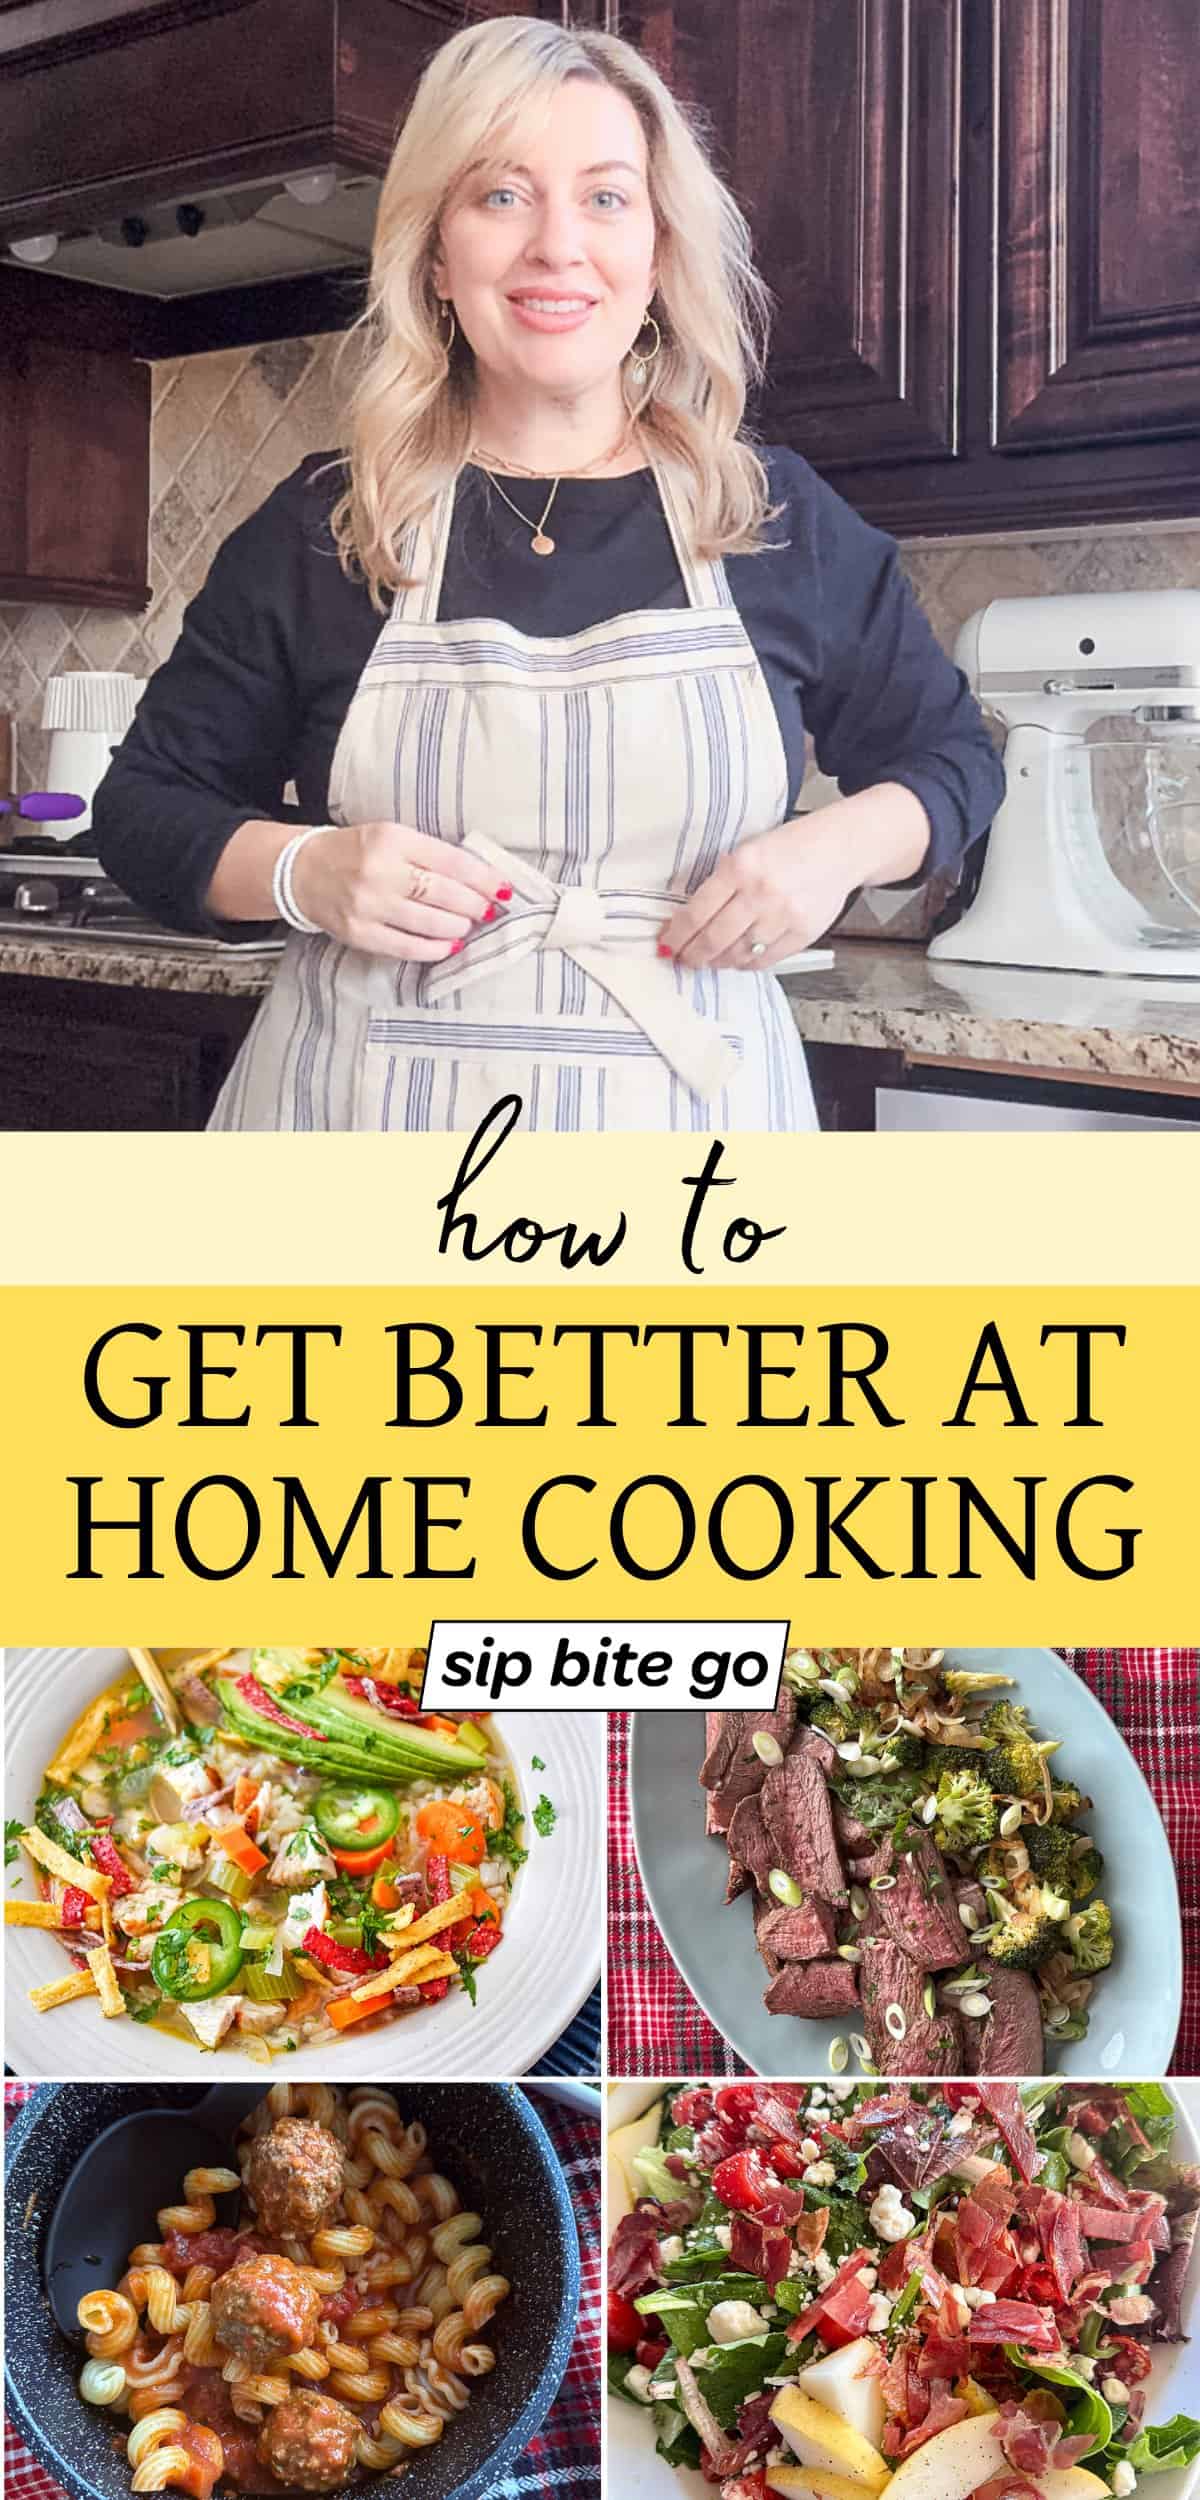 how to get better at home cooking recipes collage with text overlay